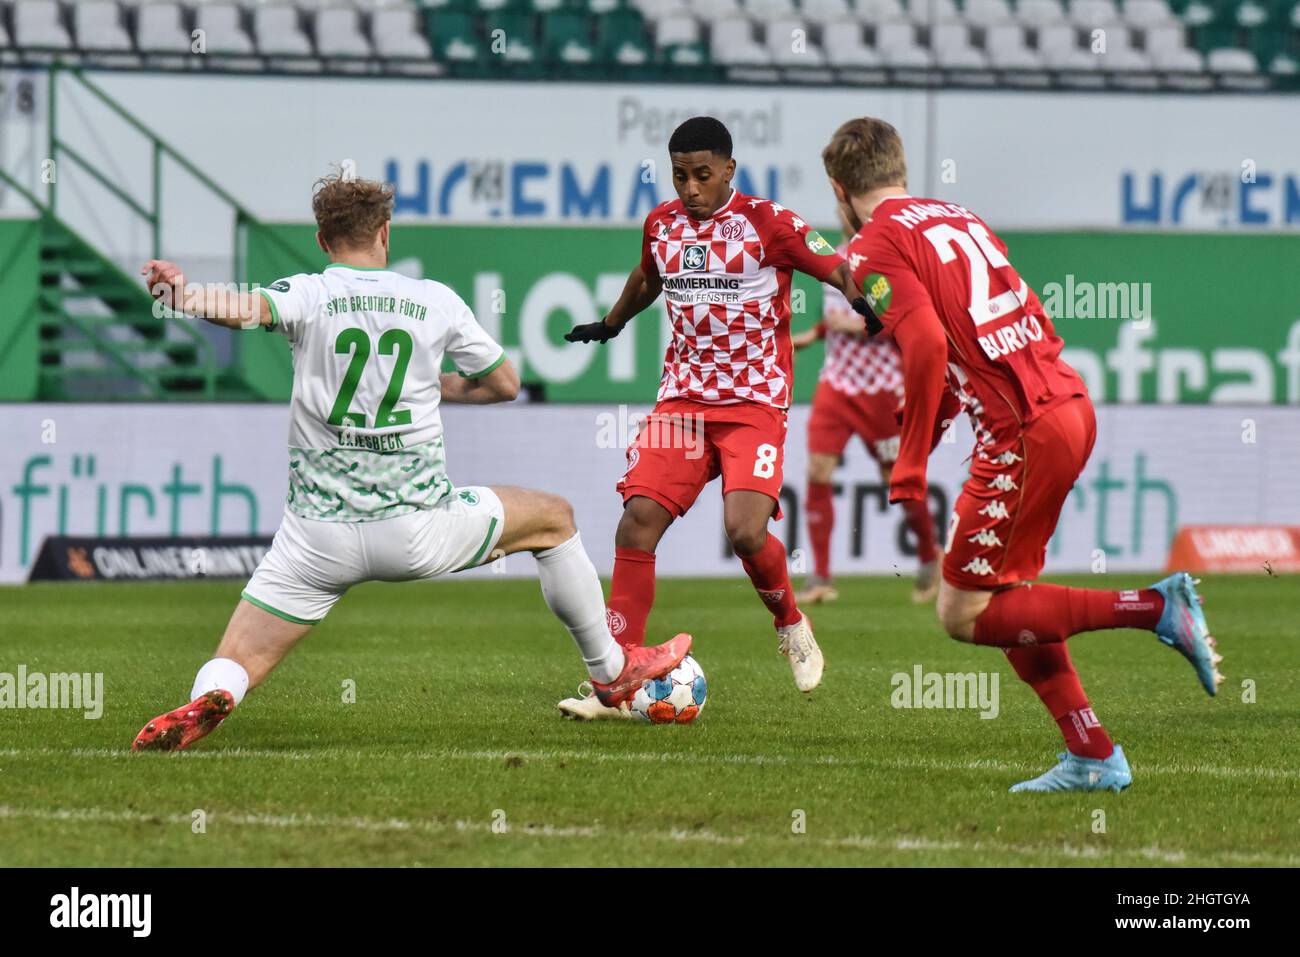 Germany ,Fuerth, Sportpark Ronhof Thomas Sommer - 22 Jan 2022 - Fussball, 1.Bundesliga - SpVgg Greuther Fuerth vs. FSV Mainz 05  Image: (fLTR) Sebastian Griesbeck (SpVgg Greuther Fürth,22) attempting to slide tackle Leandro Bareiro (Mainz, 8).  DFL regulations prohibit any use of photographs as image sequences and or quasi-video Stock Photo